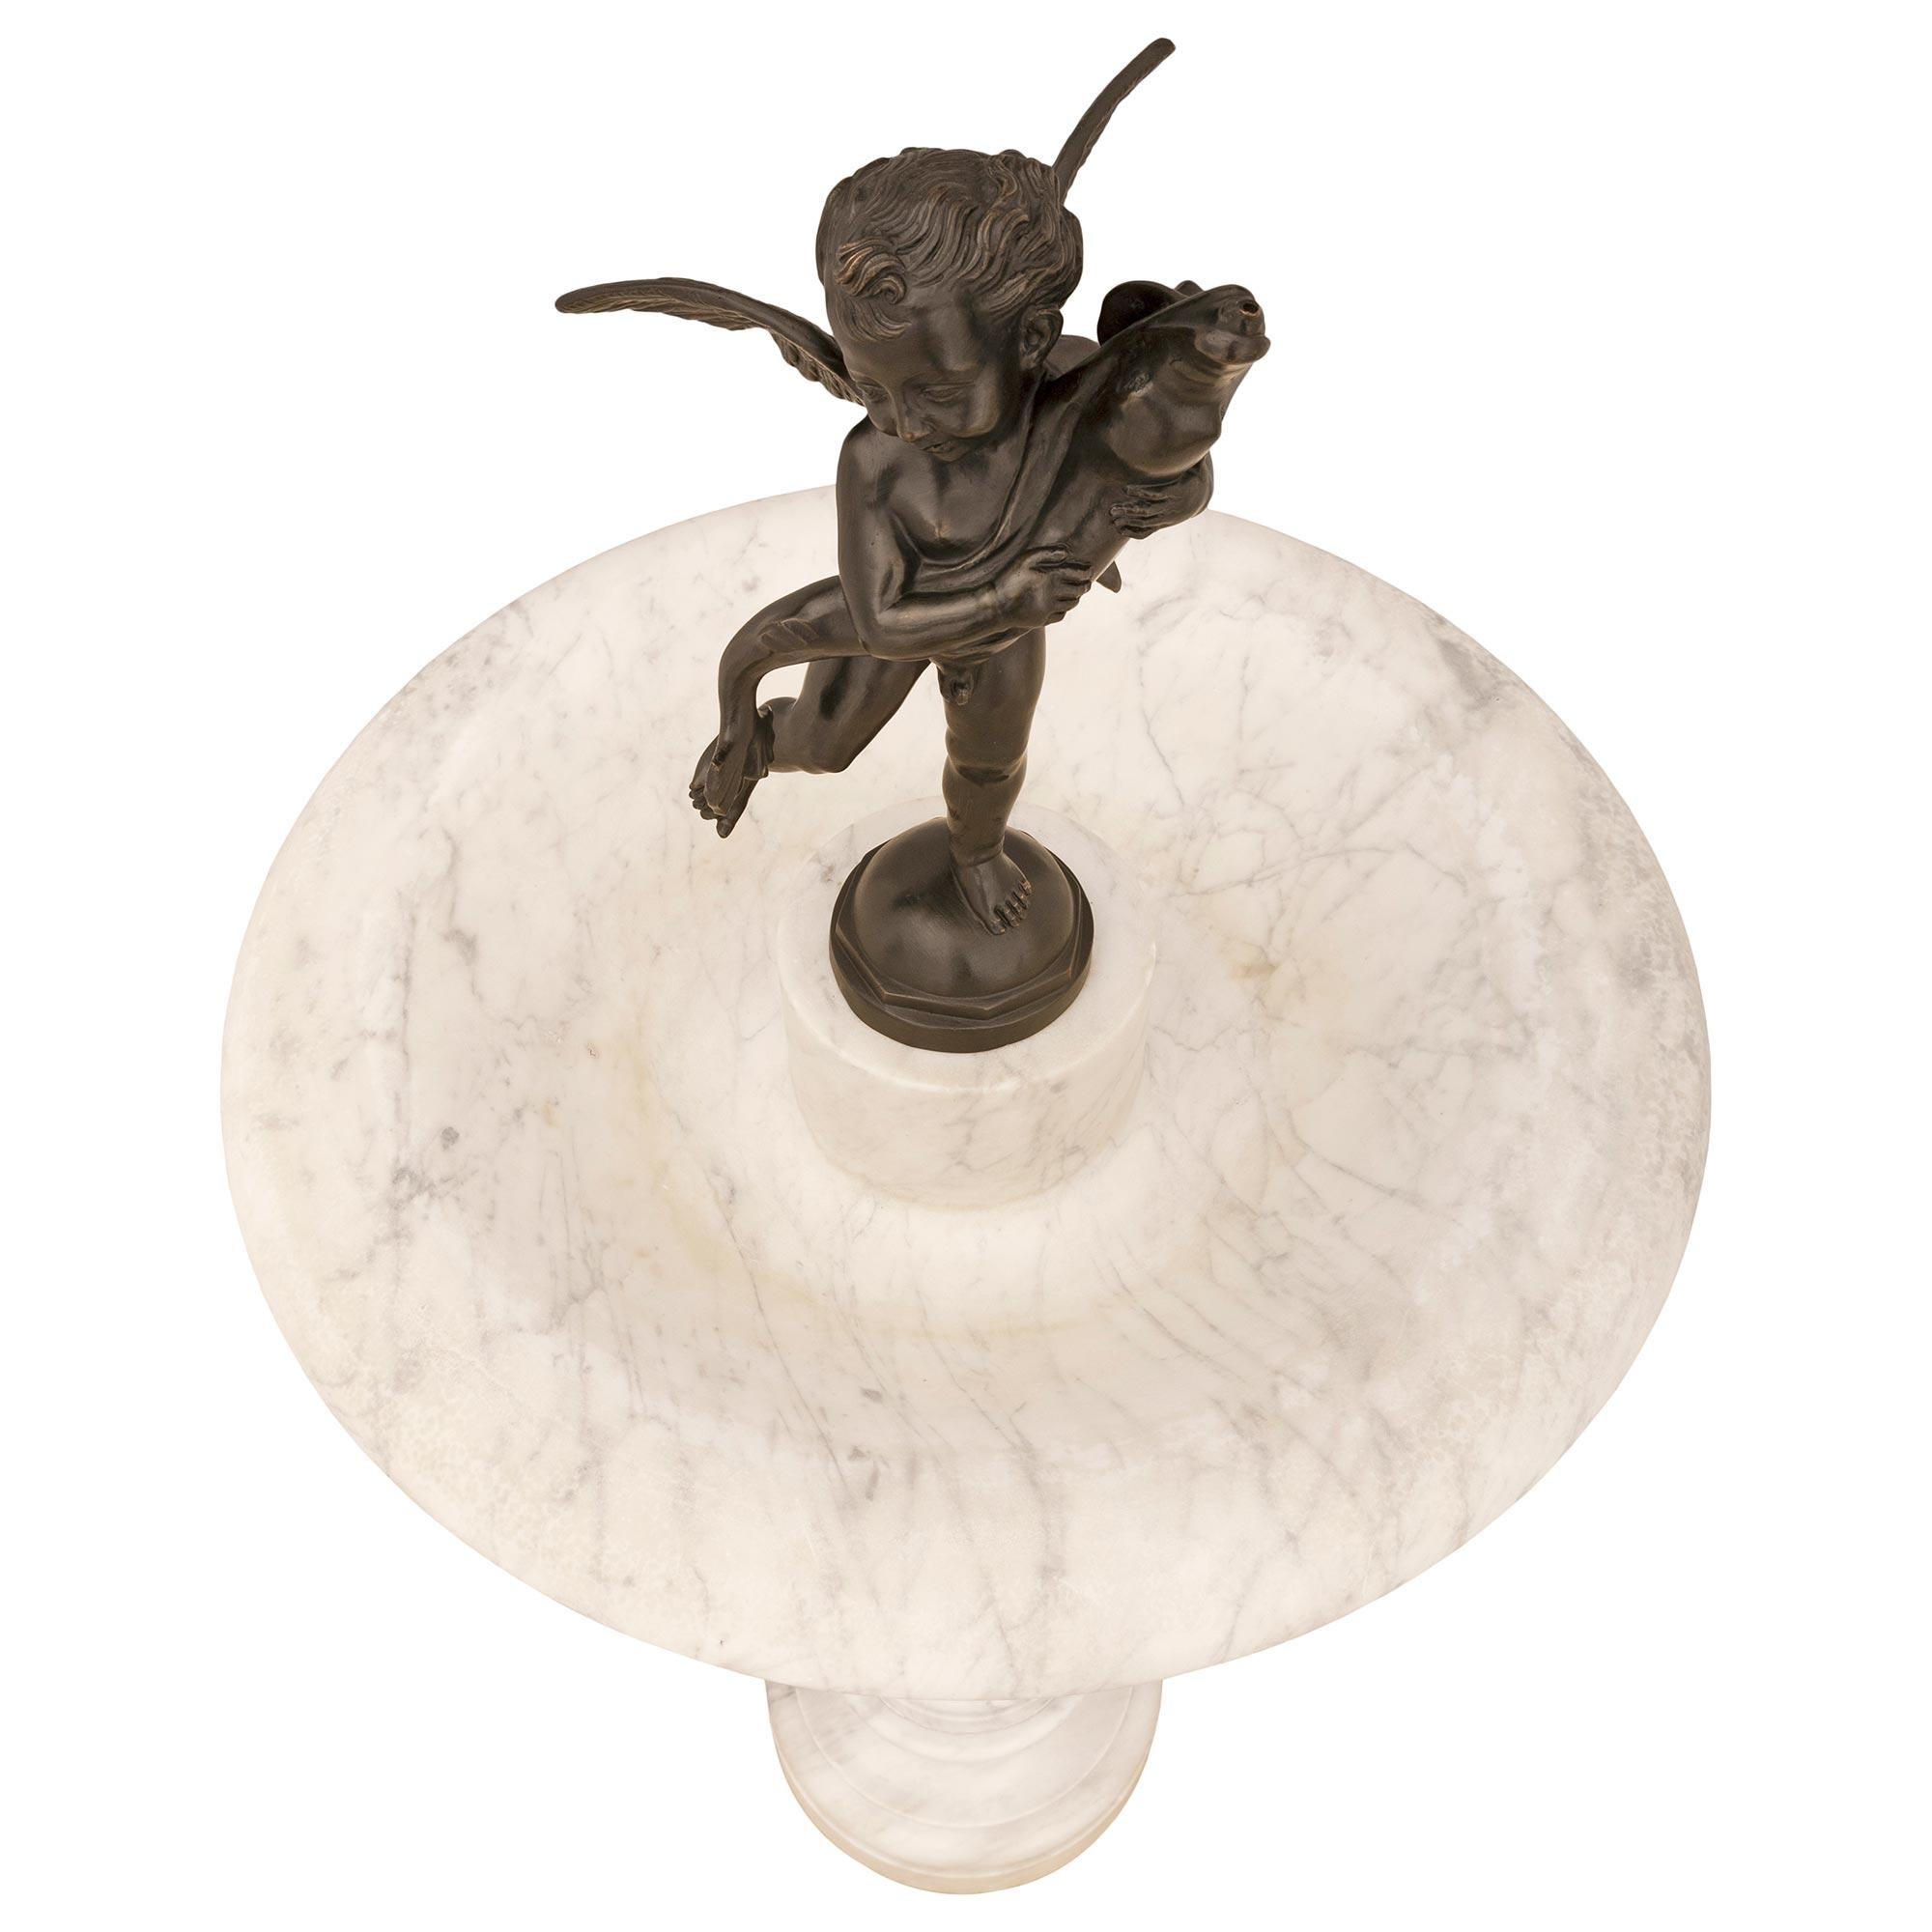 A sensational and high quality Italian 19th century white Carrara marble and patinated bronze fountain. The fountain is raised by a circular base below the elongated baluster shaped central column support. Above and at the center of the bowl is a